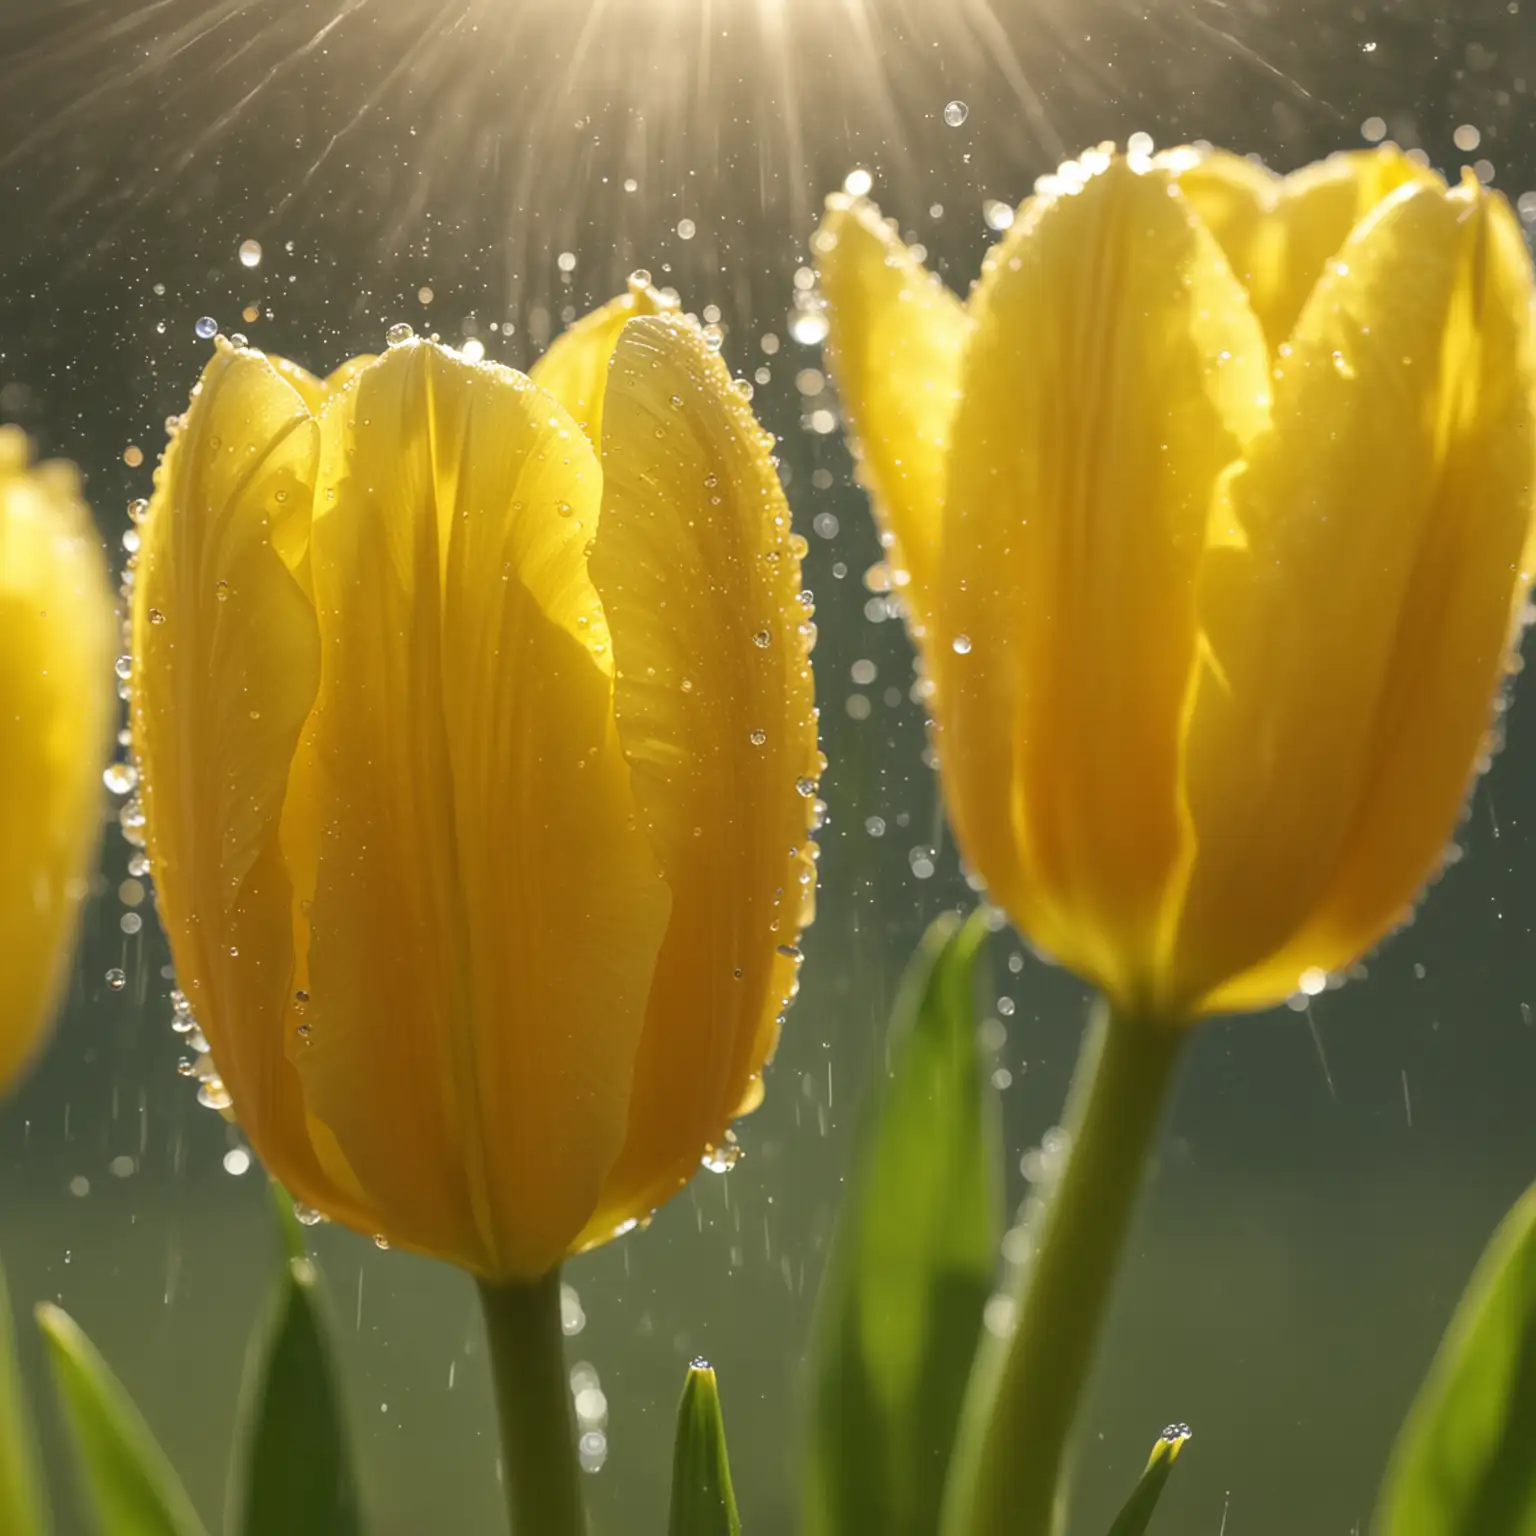 Detailed Closeup of Yellow Tulips with Glistening Water Drops under Sunlight